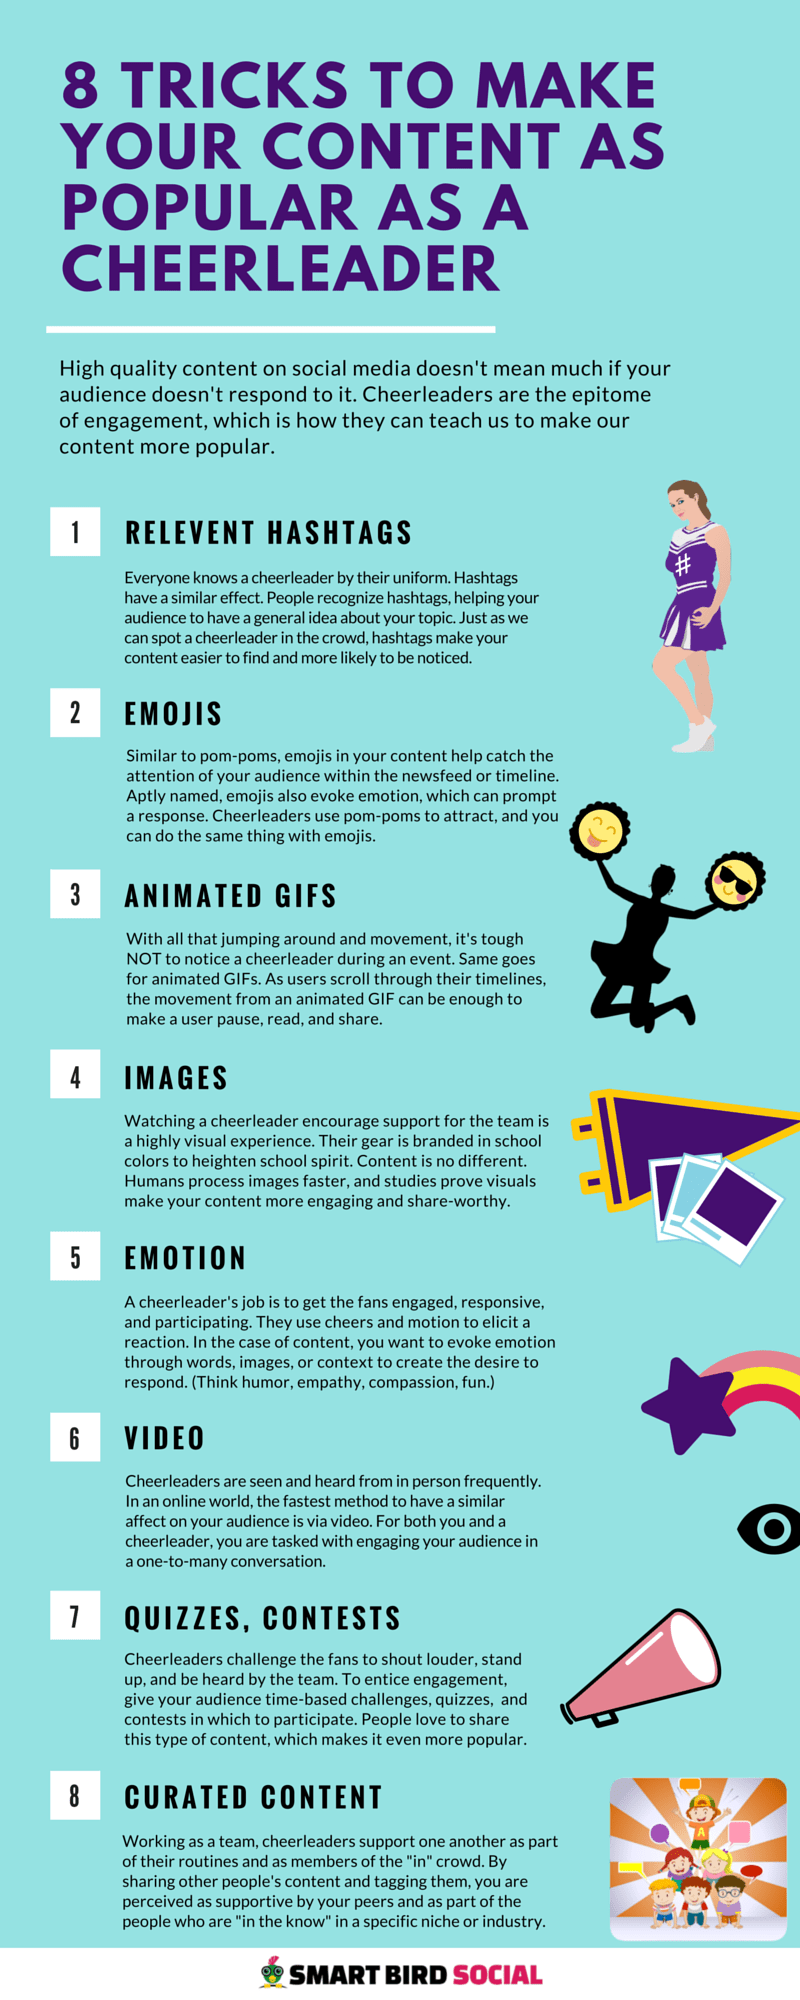 8 Tricks to Make Your Content as Popular as a Cheerleader [Infographic]